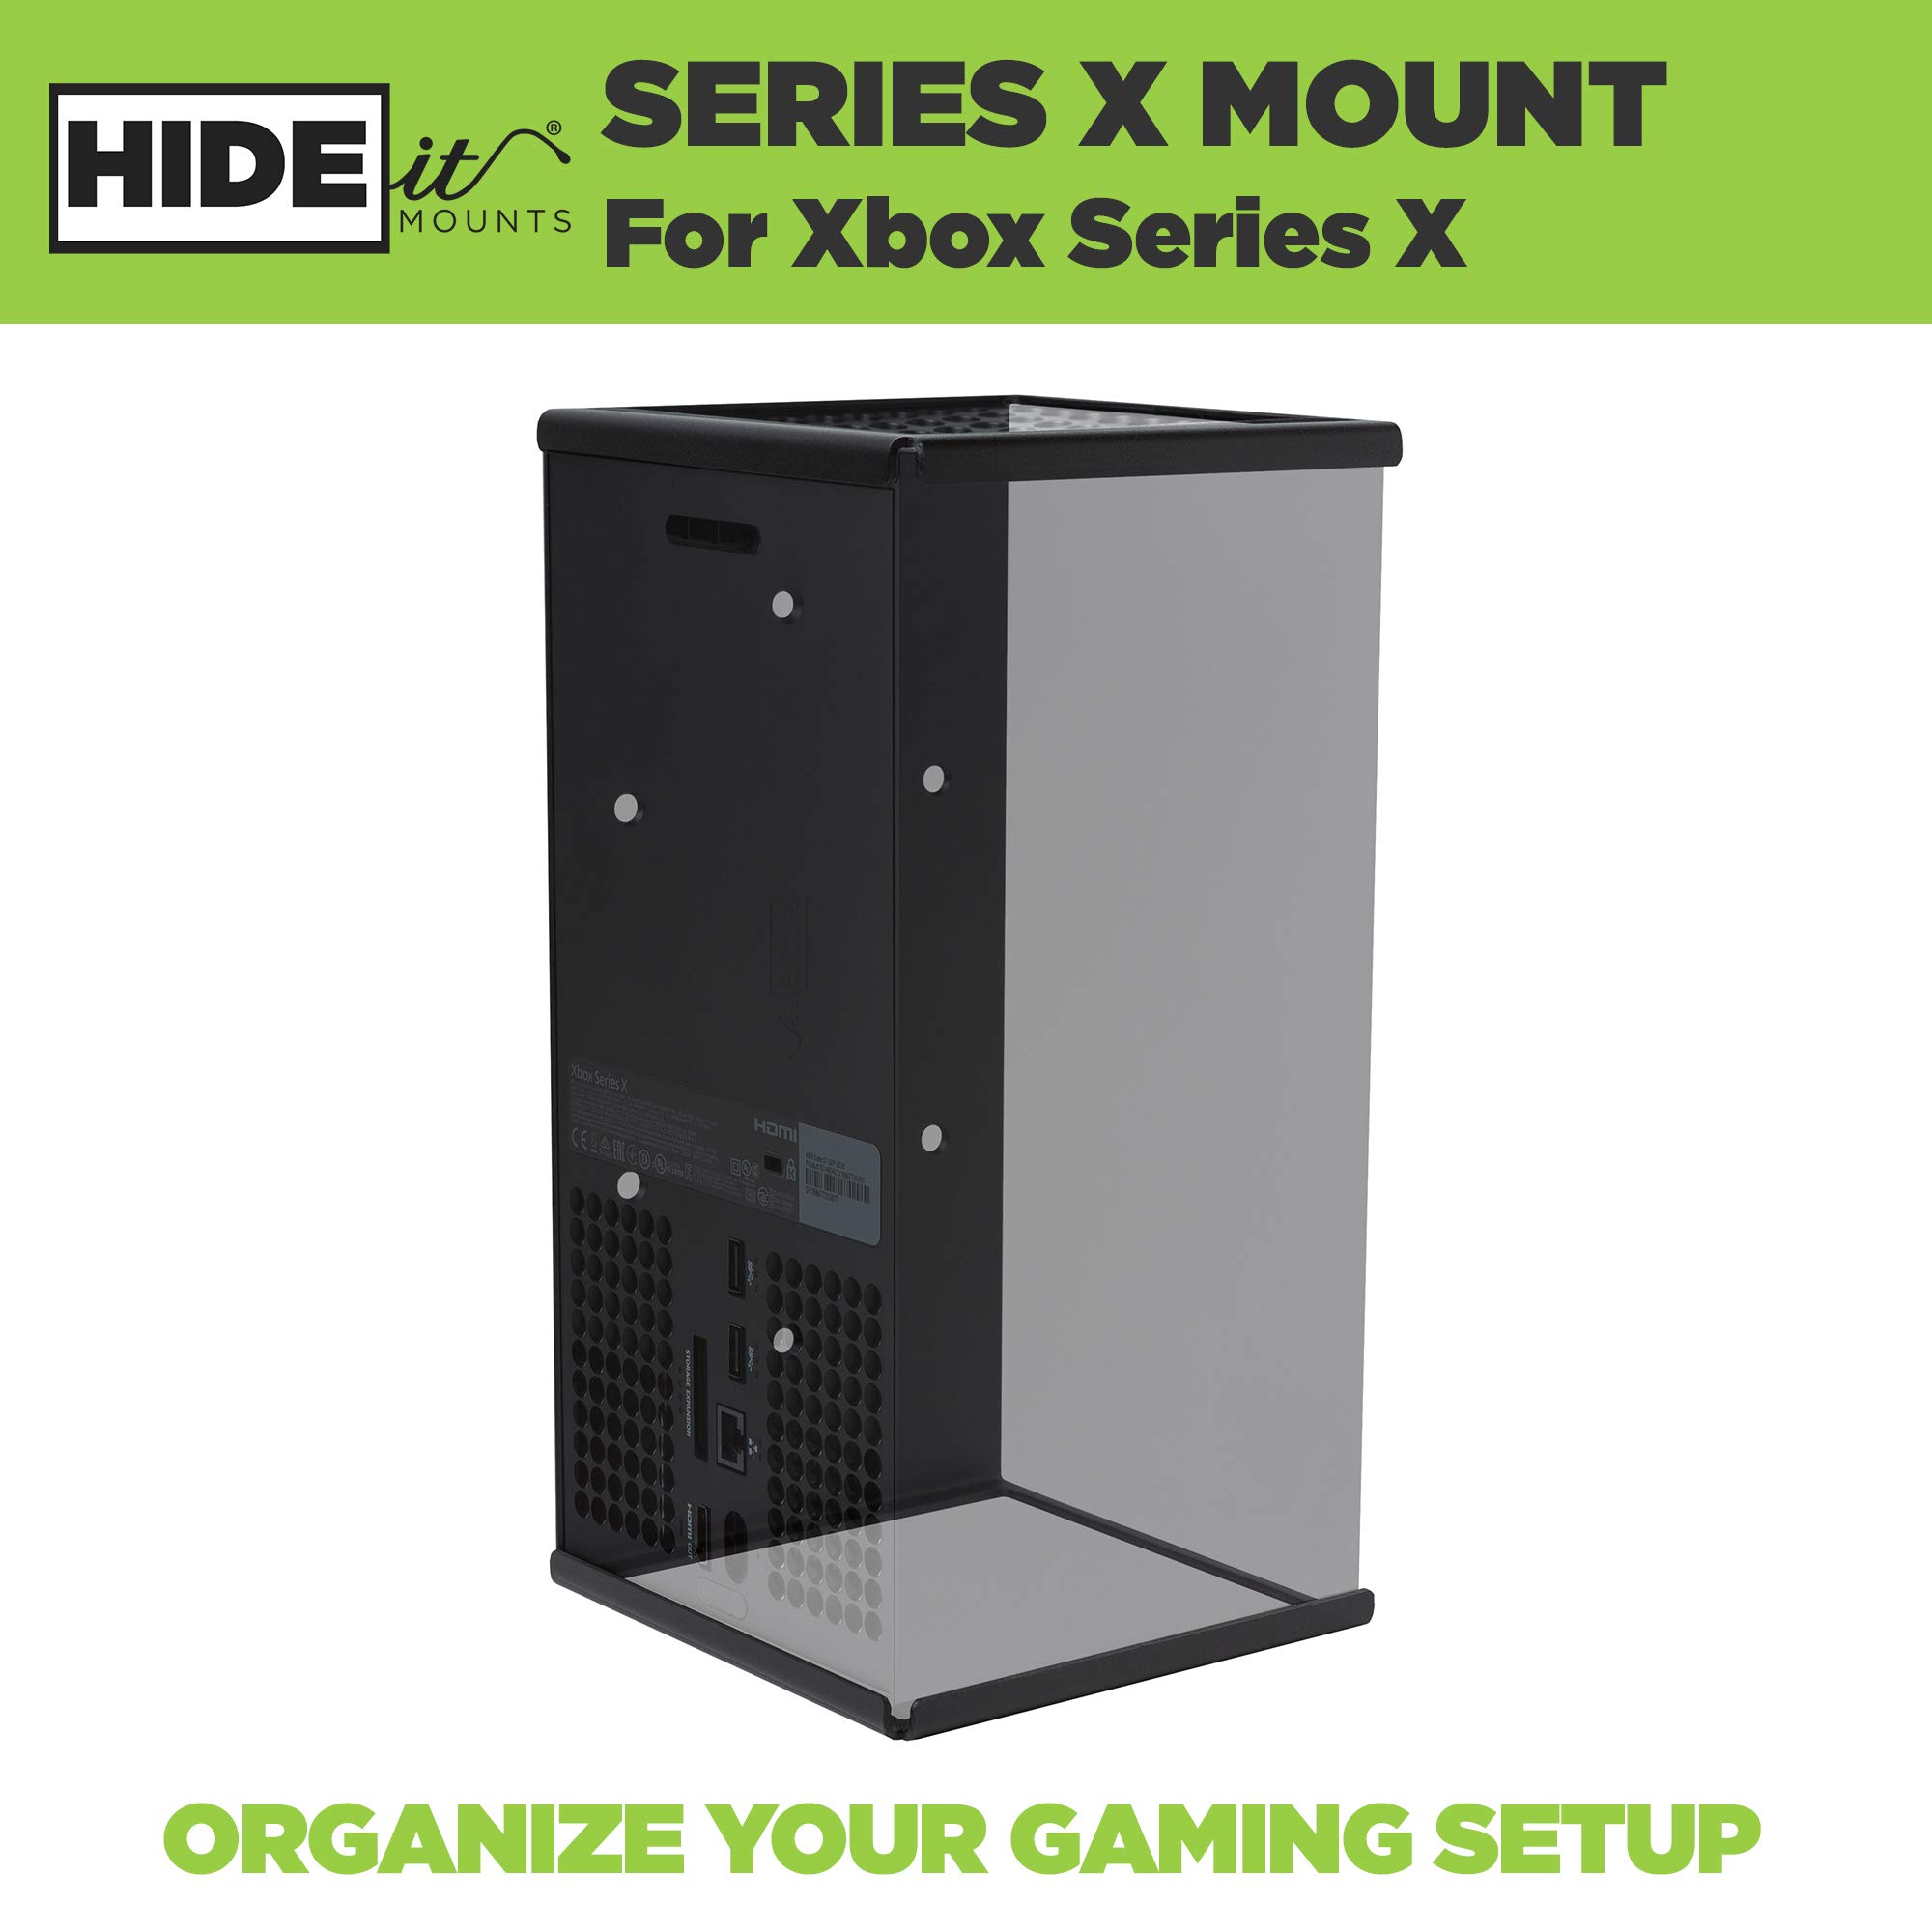 HIDEit Mounts Wall Mount for Xbox Series X - American Company - Mount for Xbox - Steel Wall Mount for Xbox Series X - Original Wall Mount Kit for Xbox Series X - Patent Pending